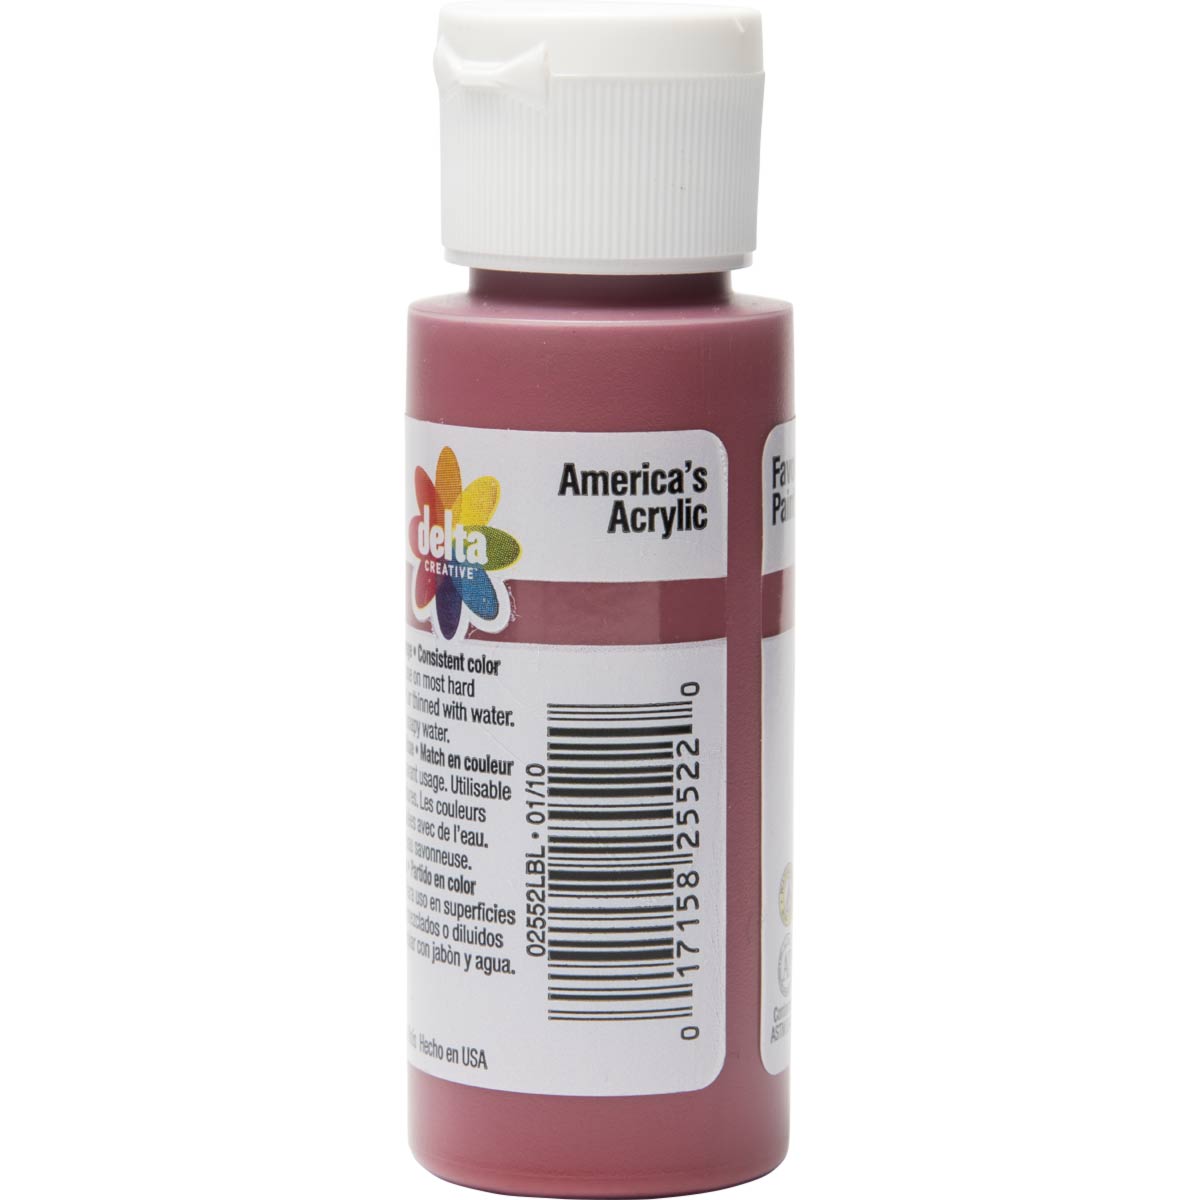 Delta Ceramcoat Acrylic Paint - Moroccan Red, 2 oz. - 025520202W